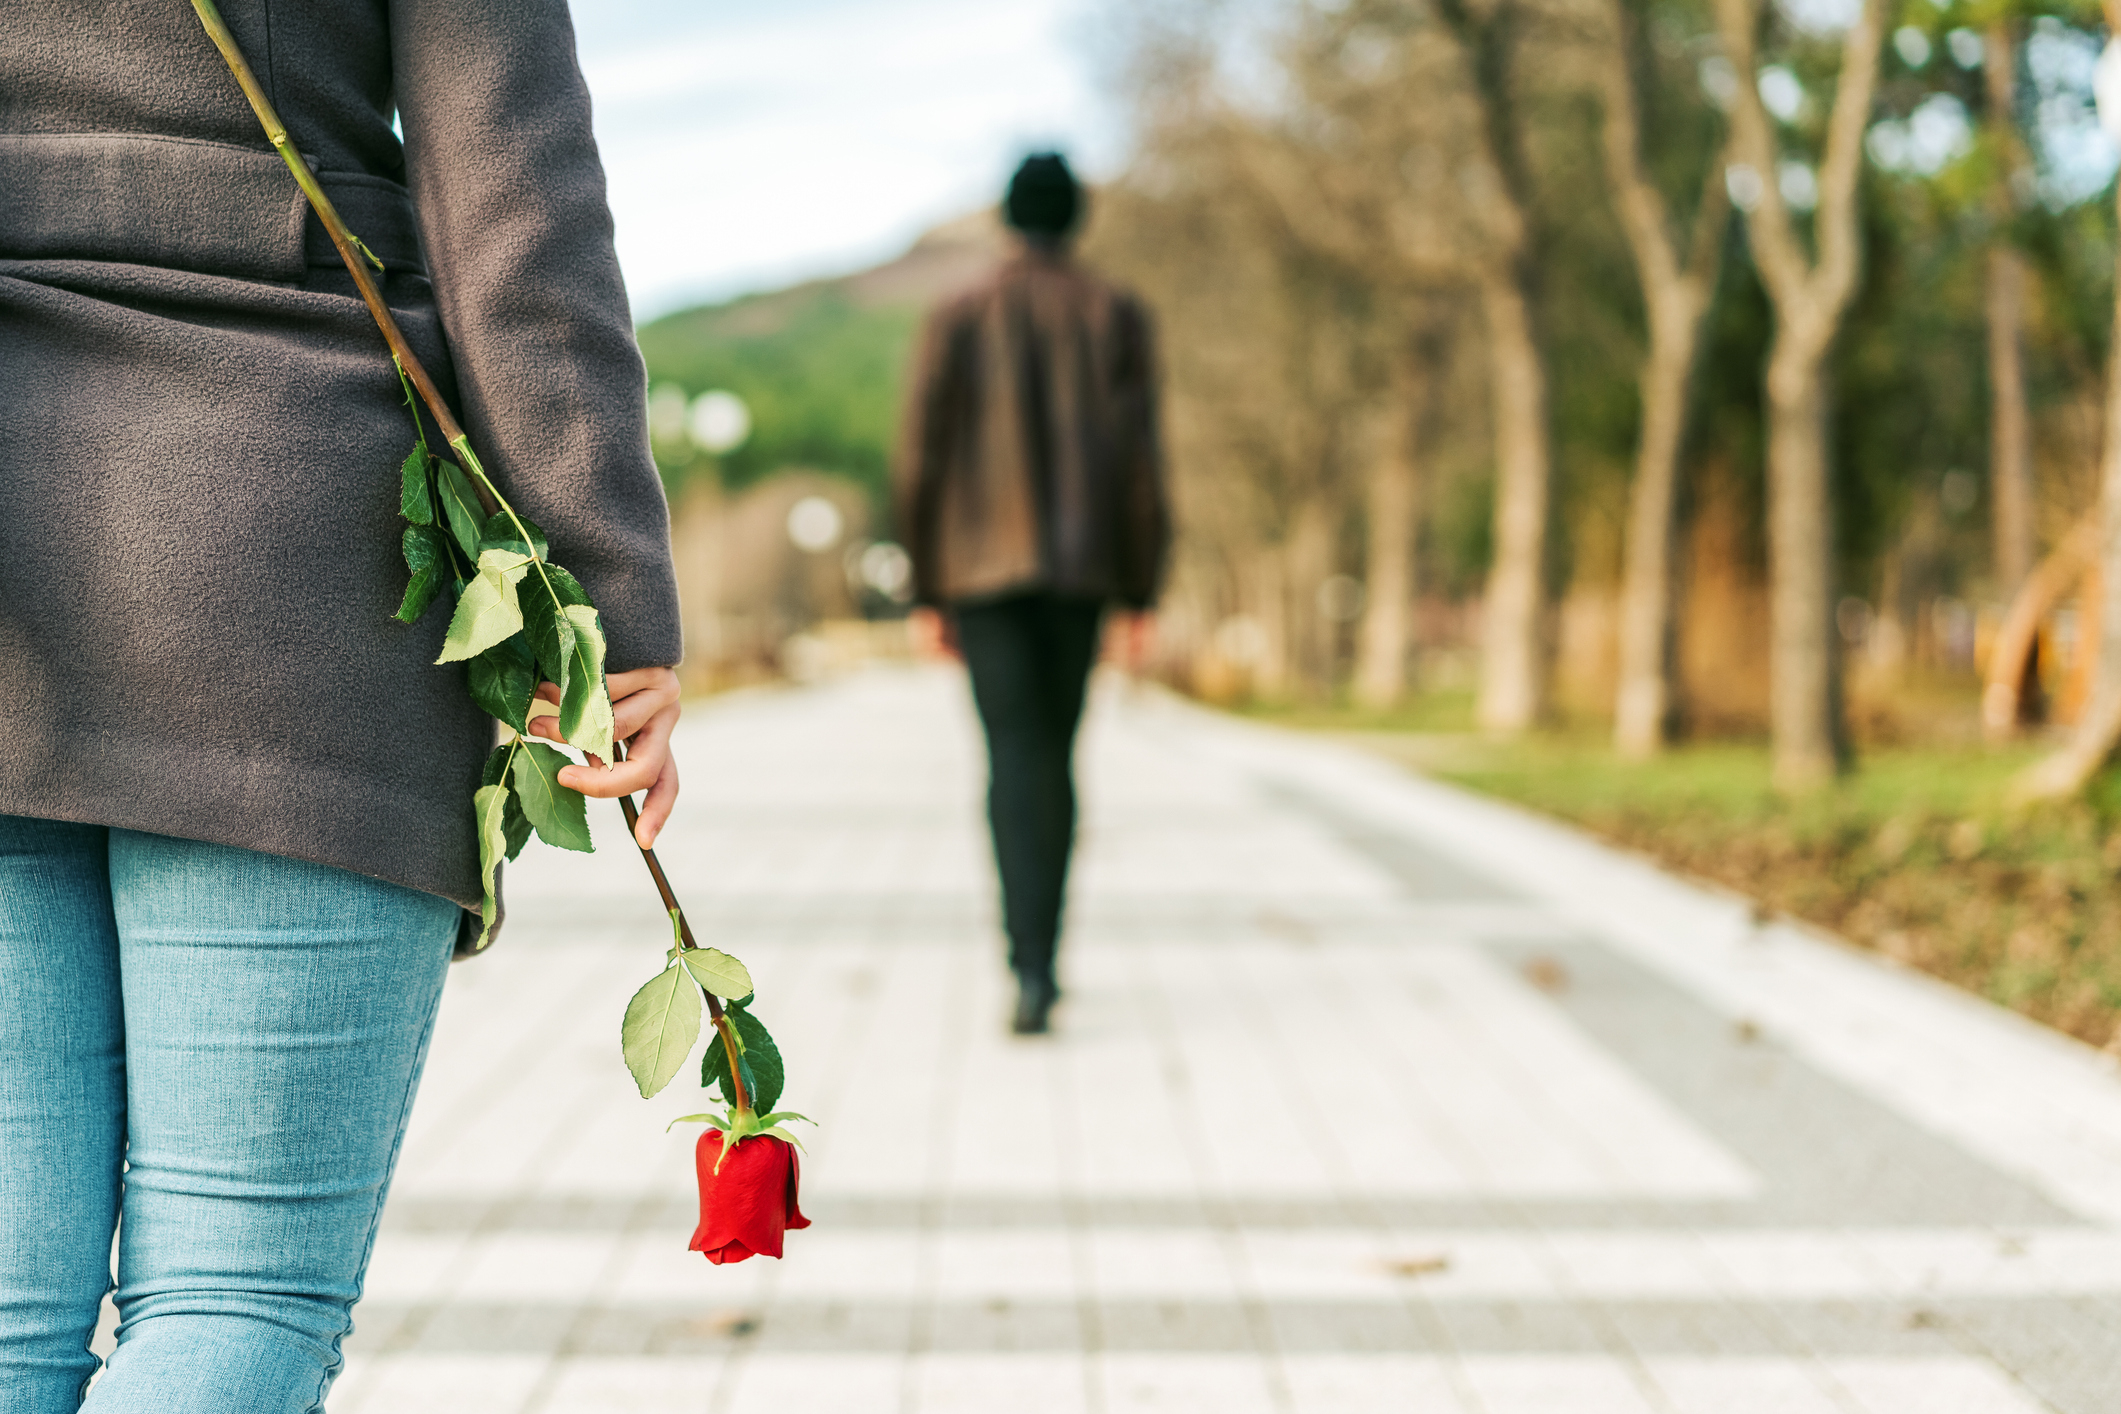 Person holding a rose watching another walk away on pathway